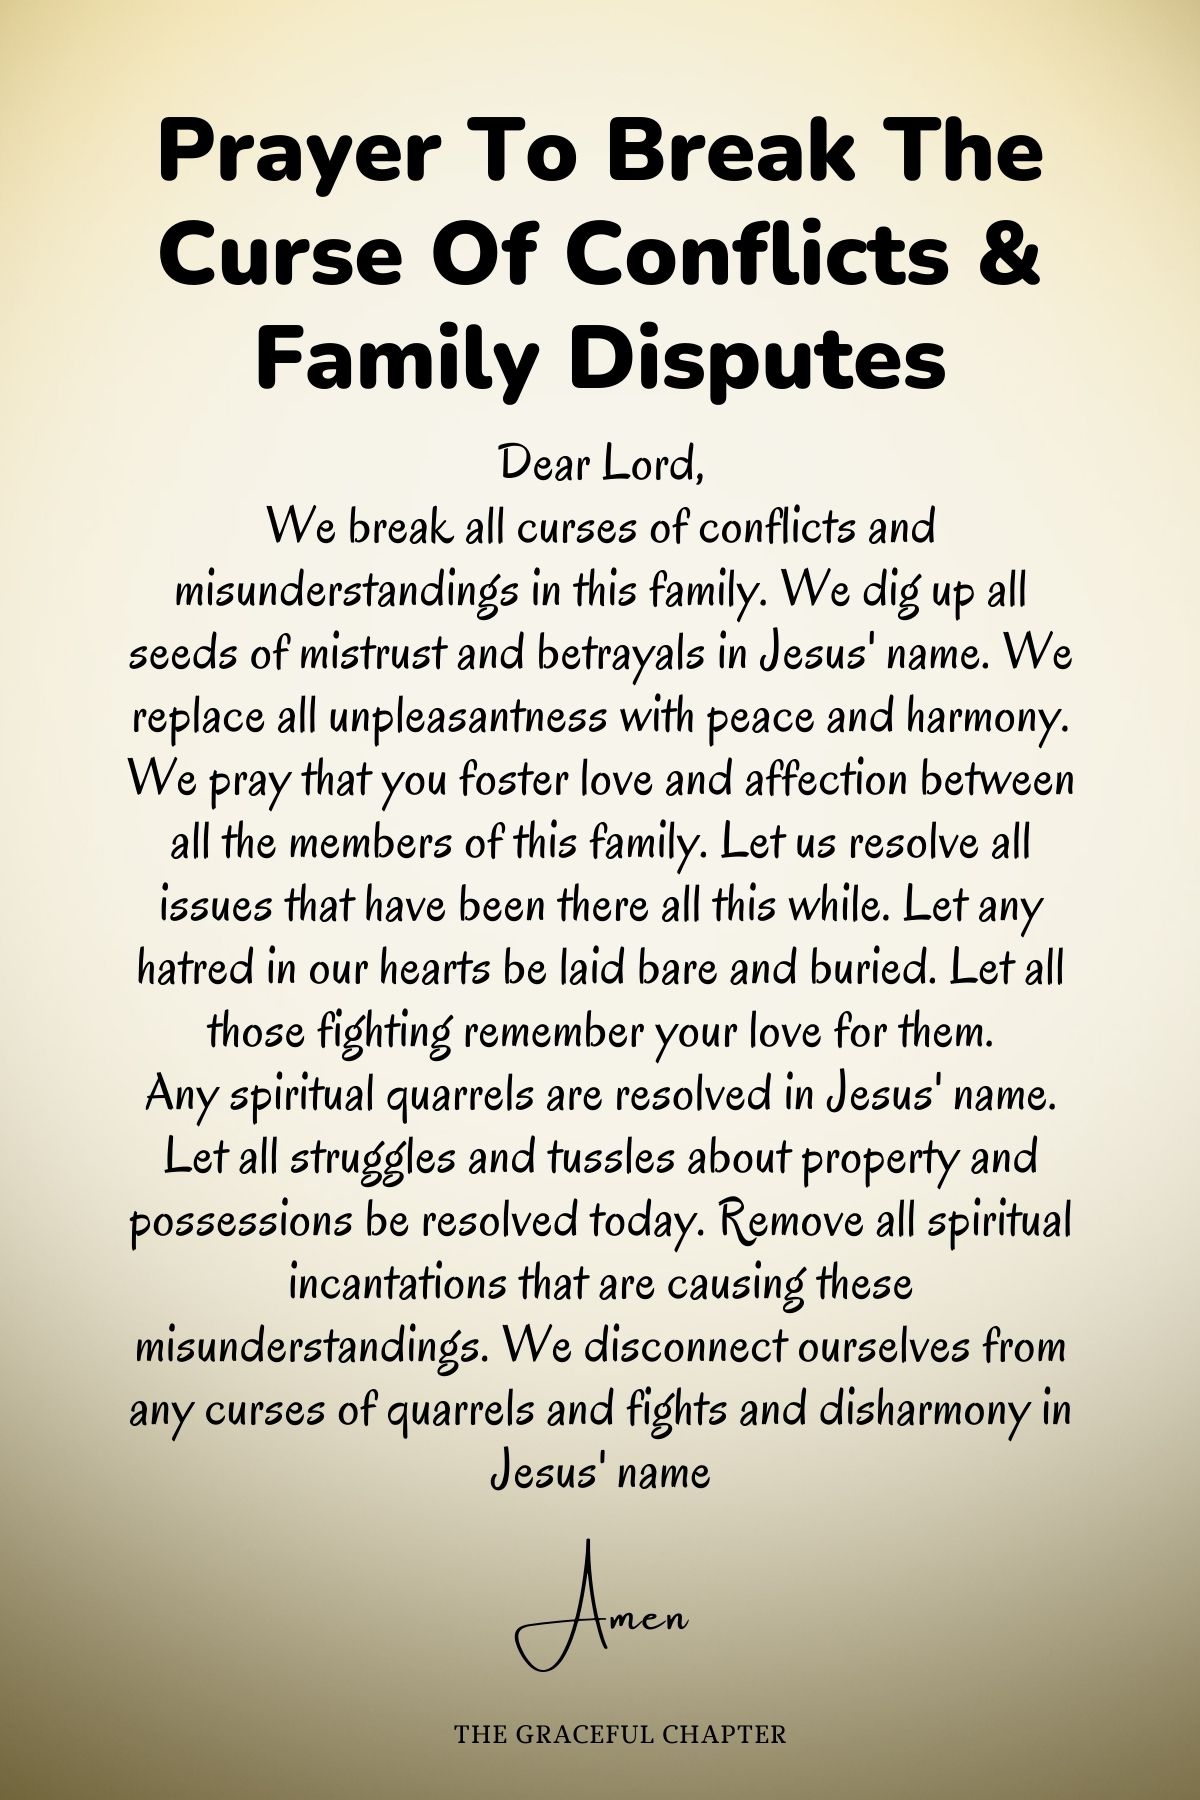 Prayer to break the curse of conflicts and family disputes